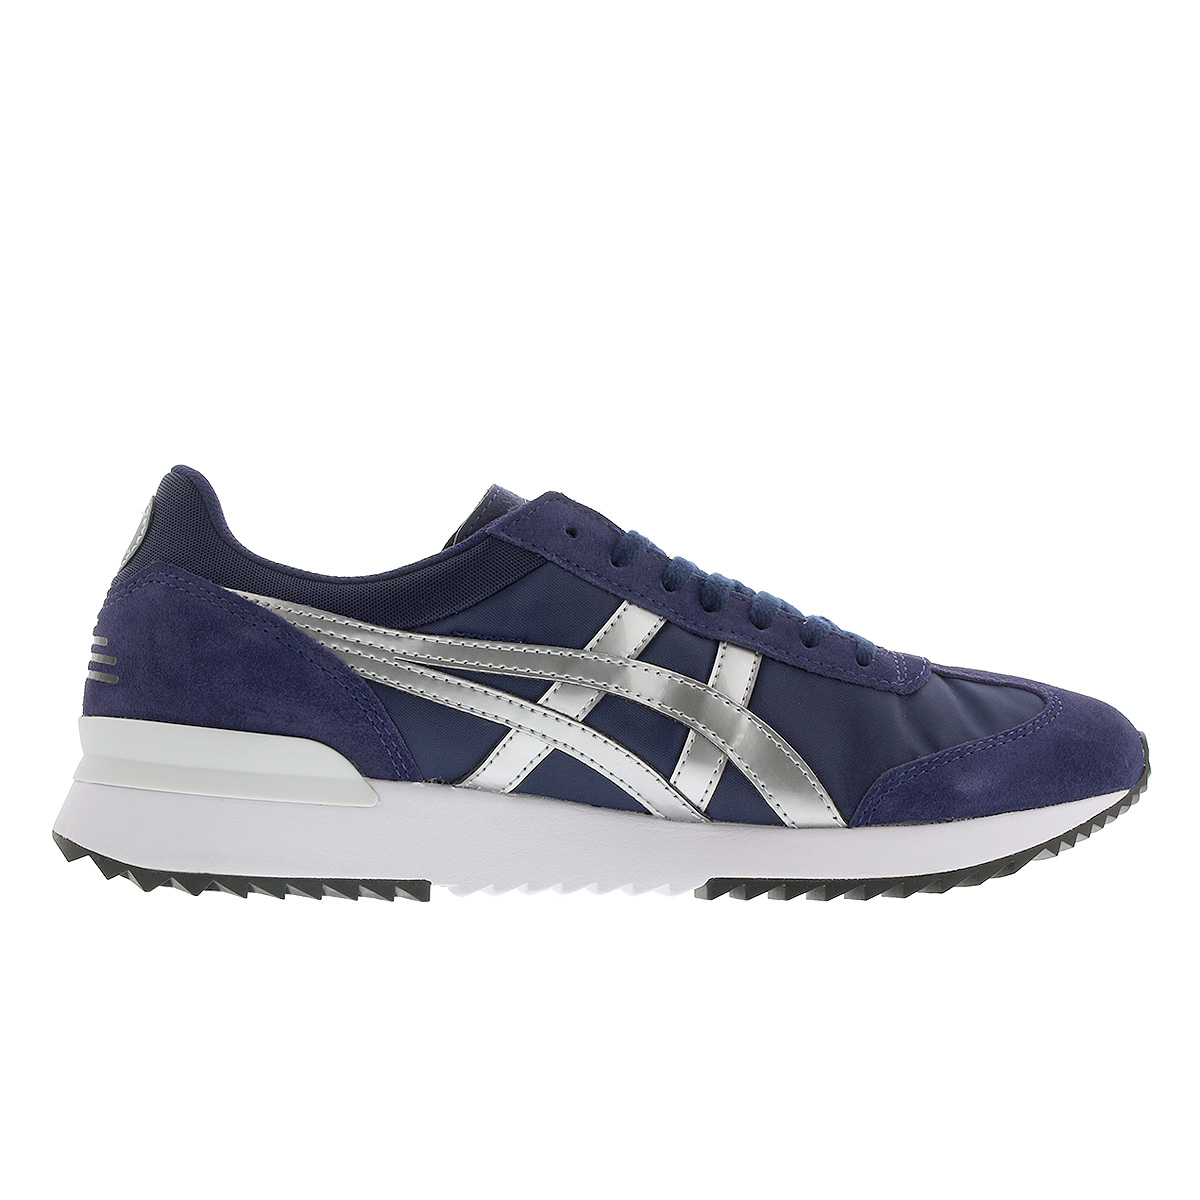 Onitsuka Tiger CALIFORNIA 78 EX オニツカタイガー カリフォルニア 78 EX PEACOAT/PURE SILVER  1183a355-403 | SELECT SHOP LOWTEX